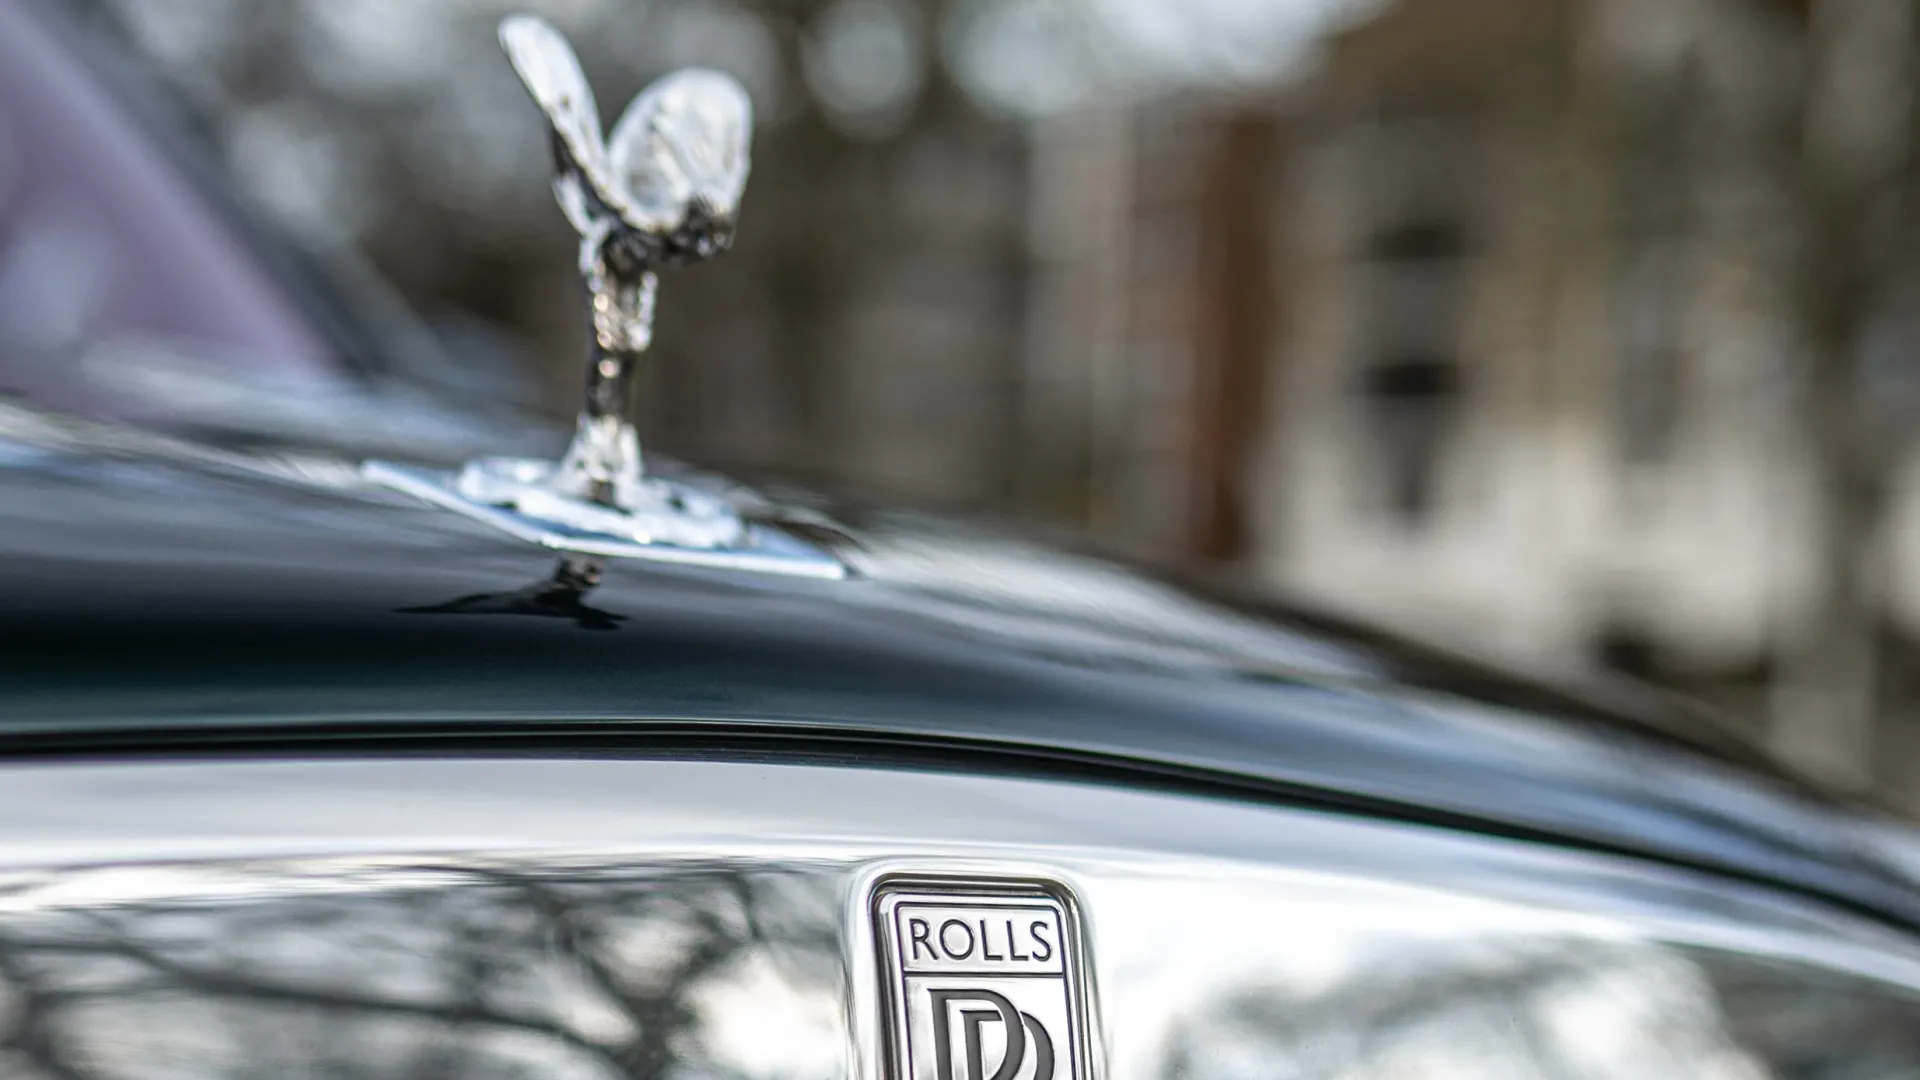 Spirit of Ecstasy on top of the Chrome Rolls-Royce Grill